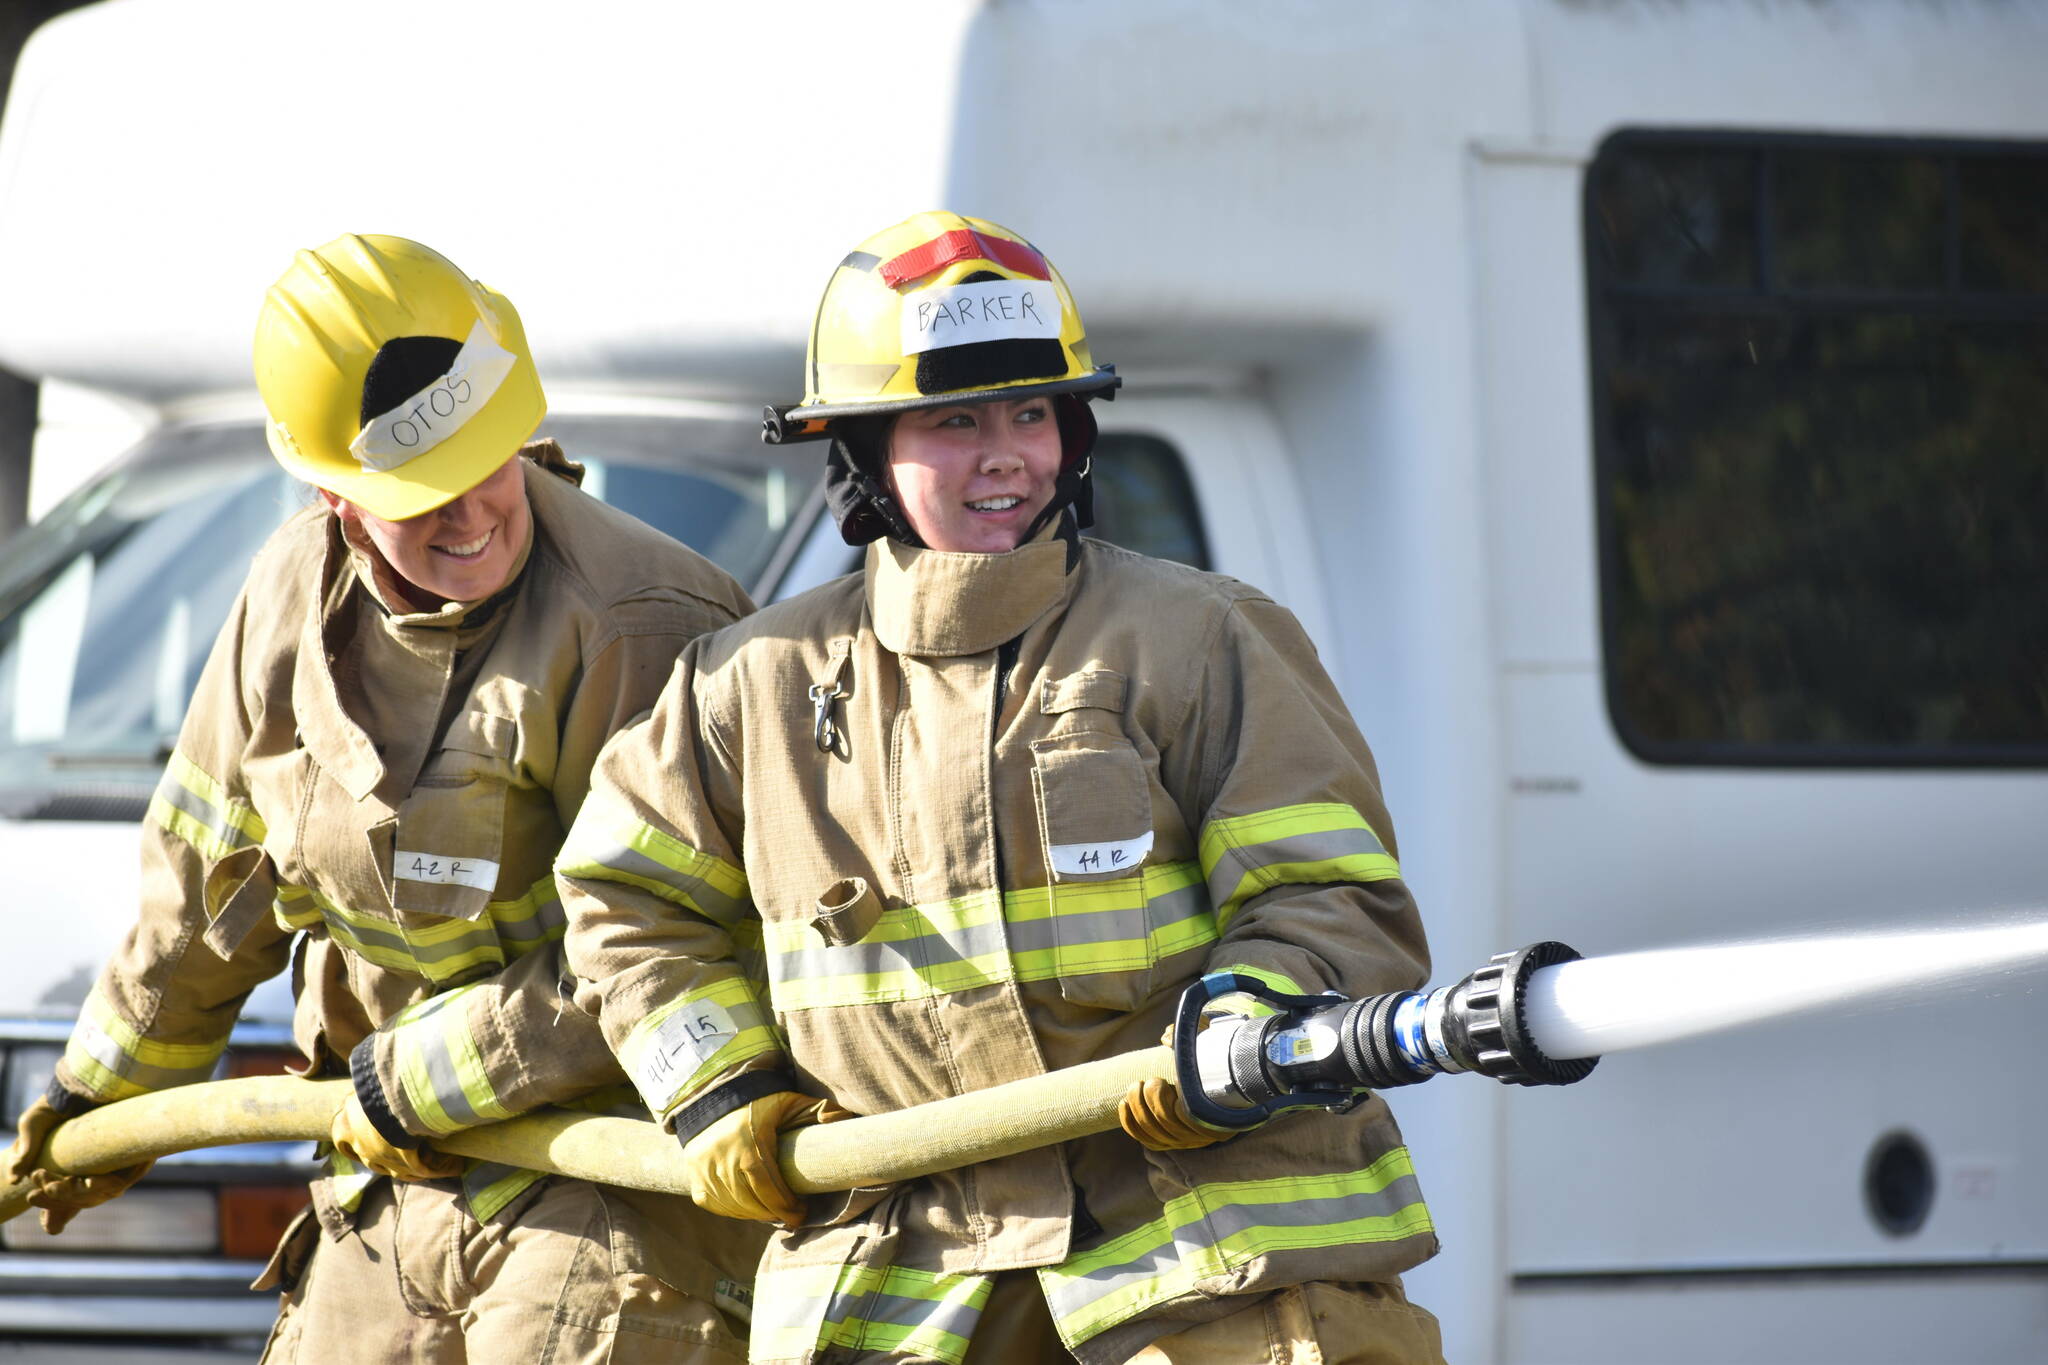 Around three dozen women practiced hauling equipment, handling hoses and rescuing victims at a training event last weekend in Federal Way at South King Fire and Rescue’s Station 68. Photos by Alex Bruell